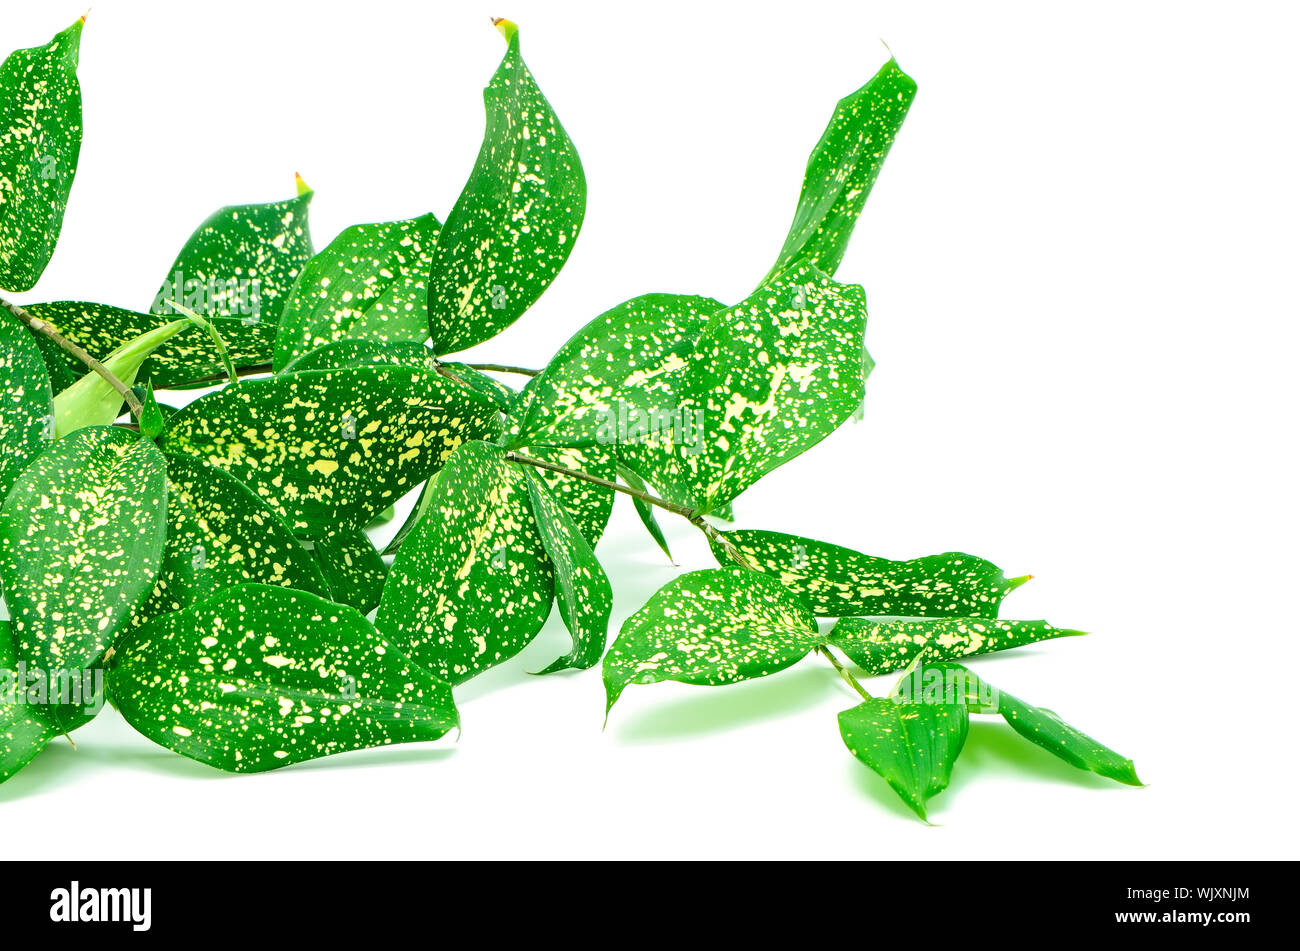 Foliage leaves of dracaena, Gold Dust dracaena or Spotted dracaena, green form, isolated on a white background Stock Photo